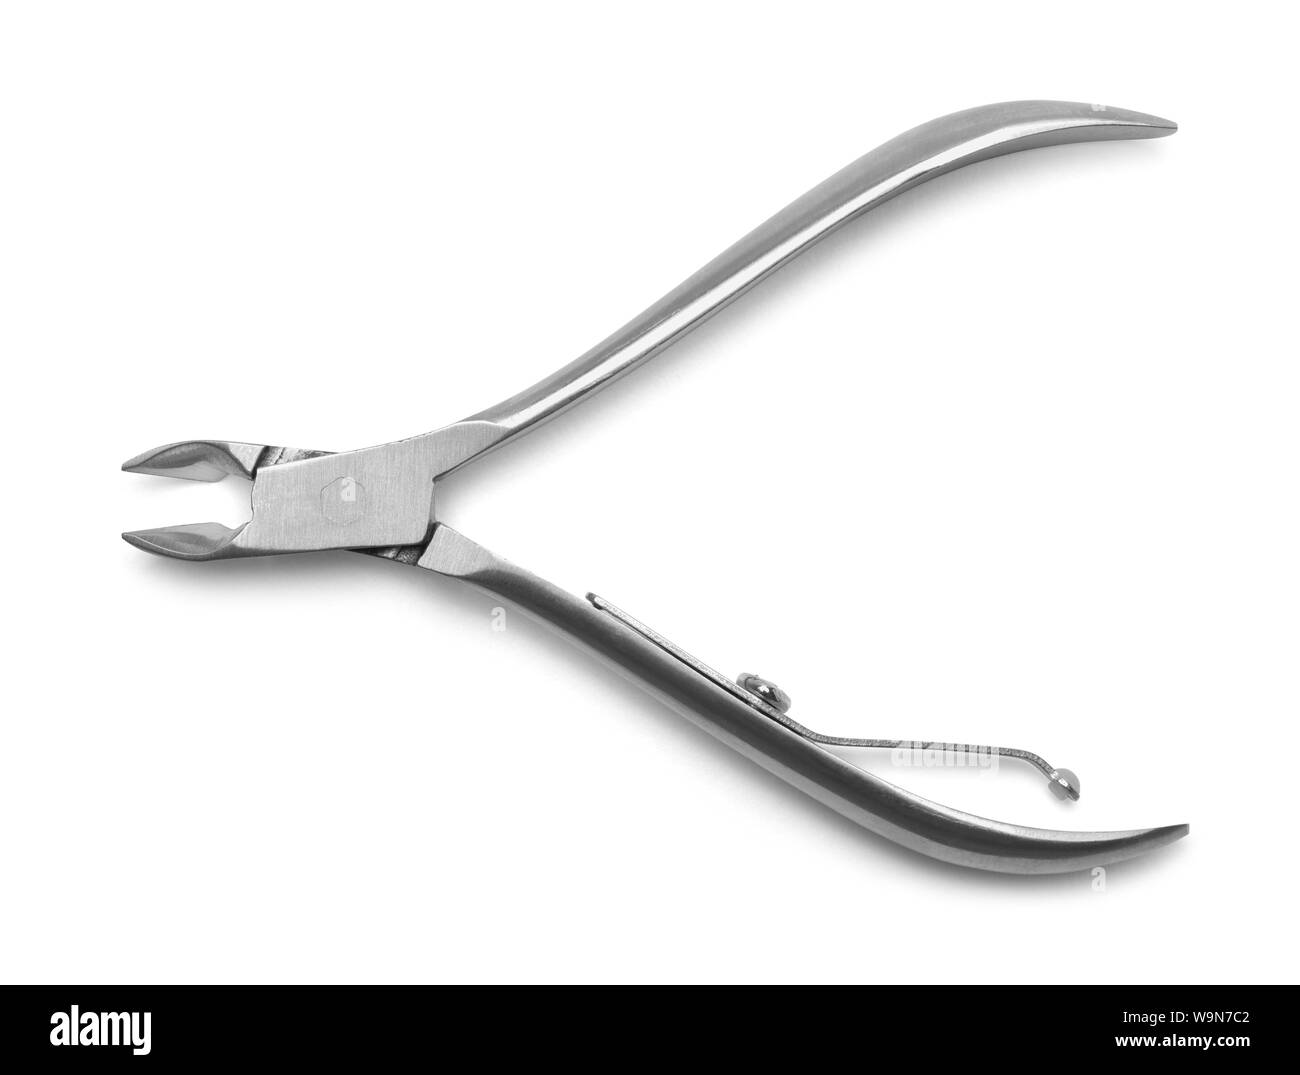 Metal Toenail Scissors Clippers Isolated on White. Stock Photo